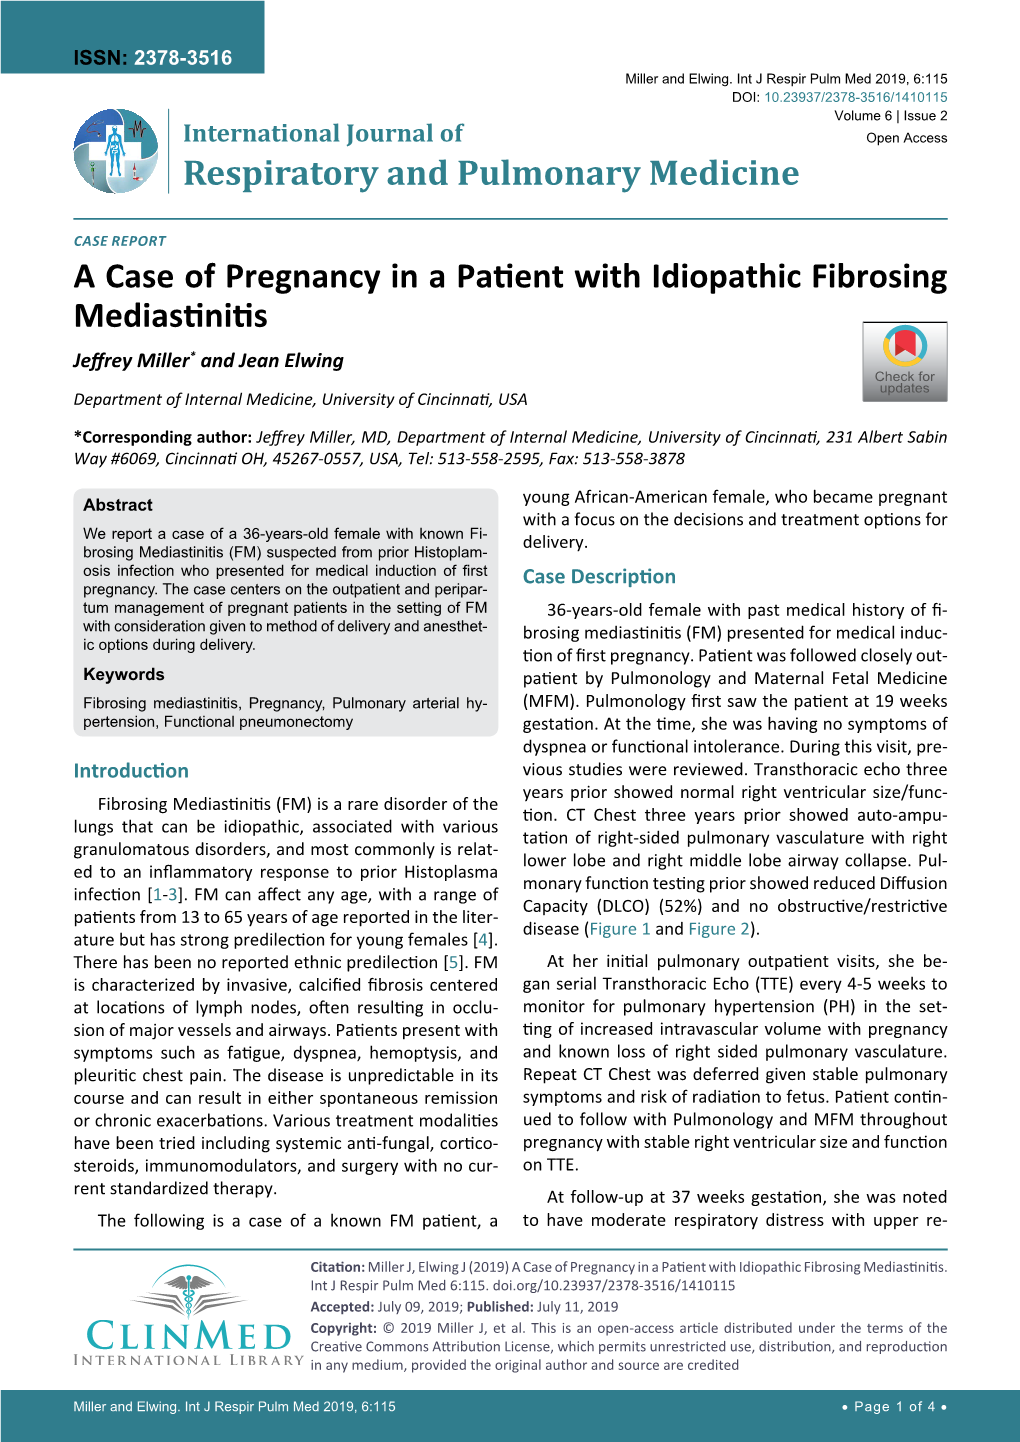 A Case of Pregnancy in a Patient with Idiopathic Fibrosing Mediastinitis